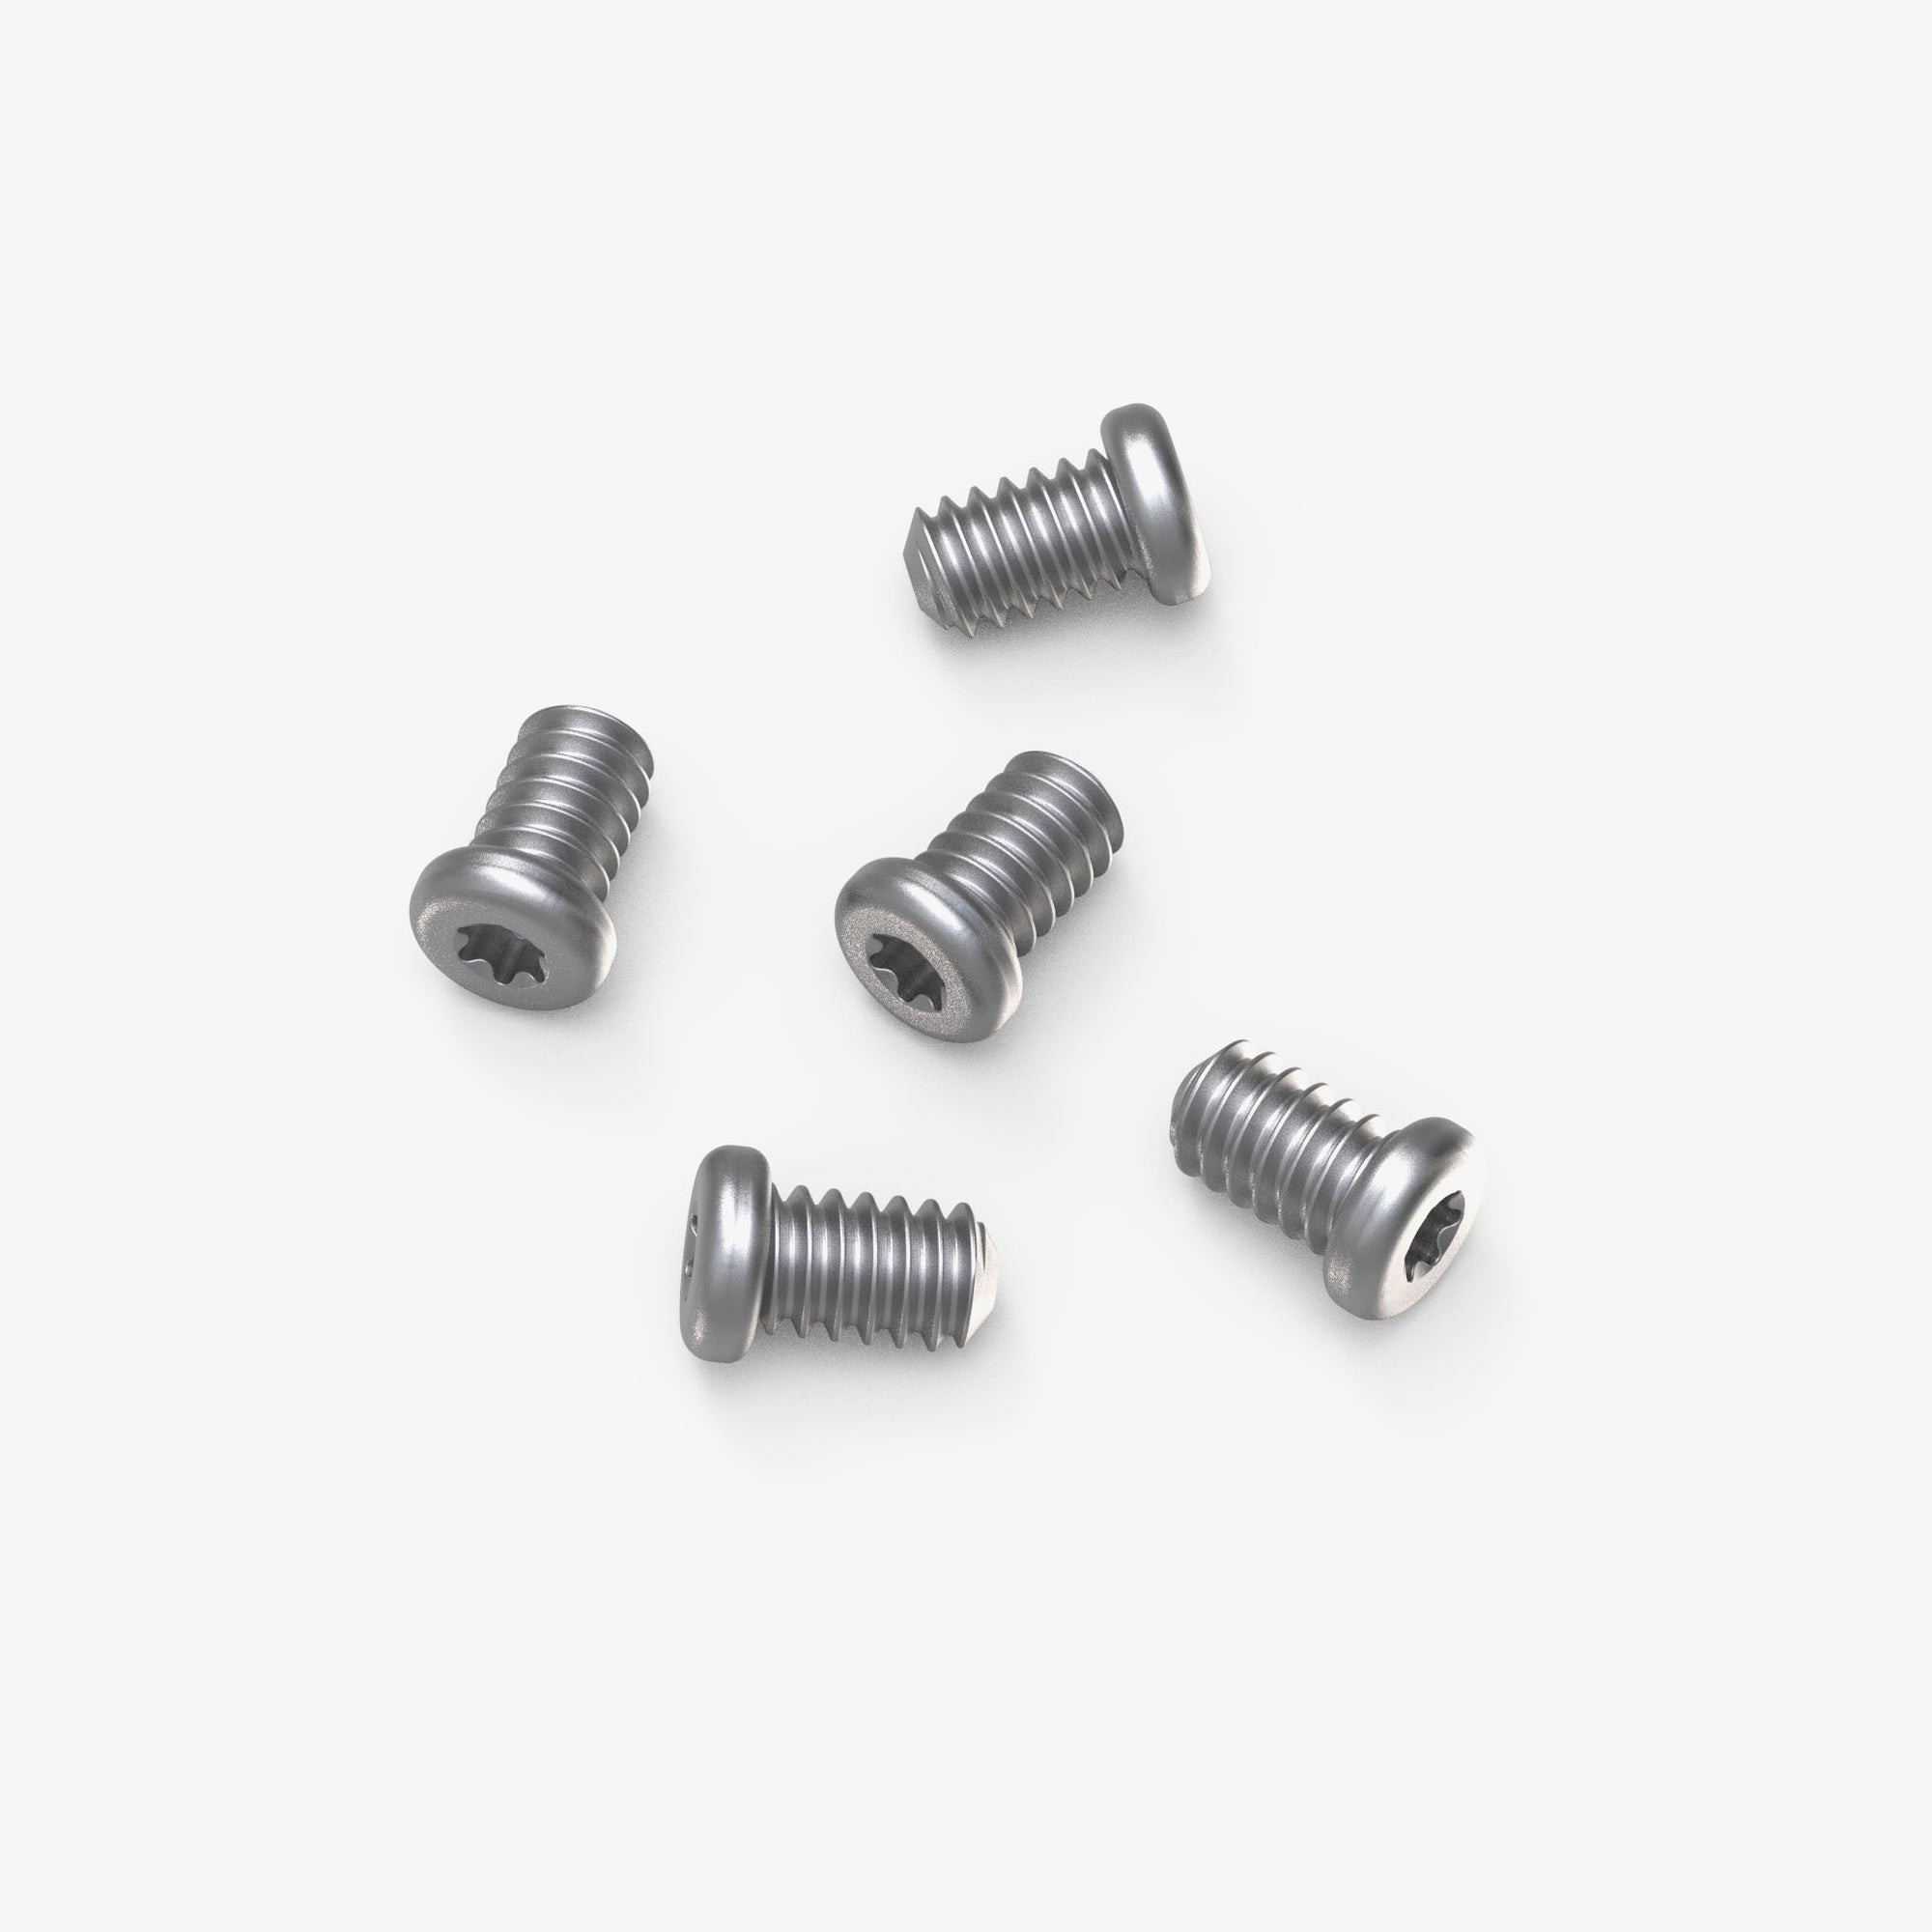 Replacement Screws for CRKT Minimalist-Silver